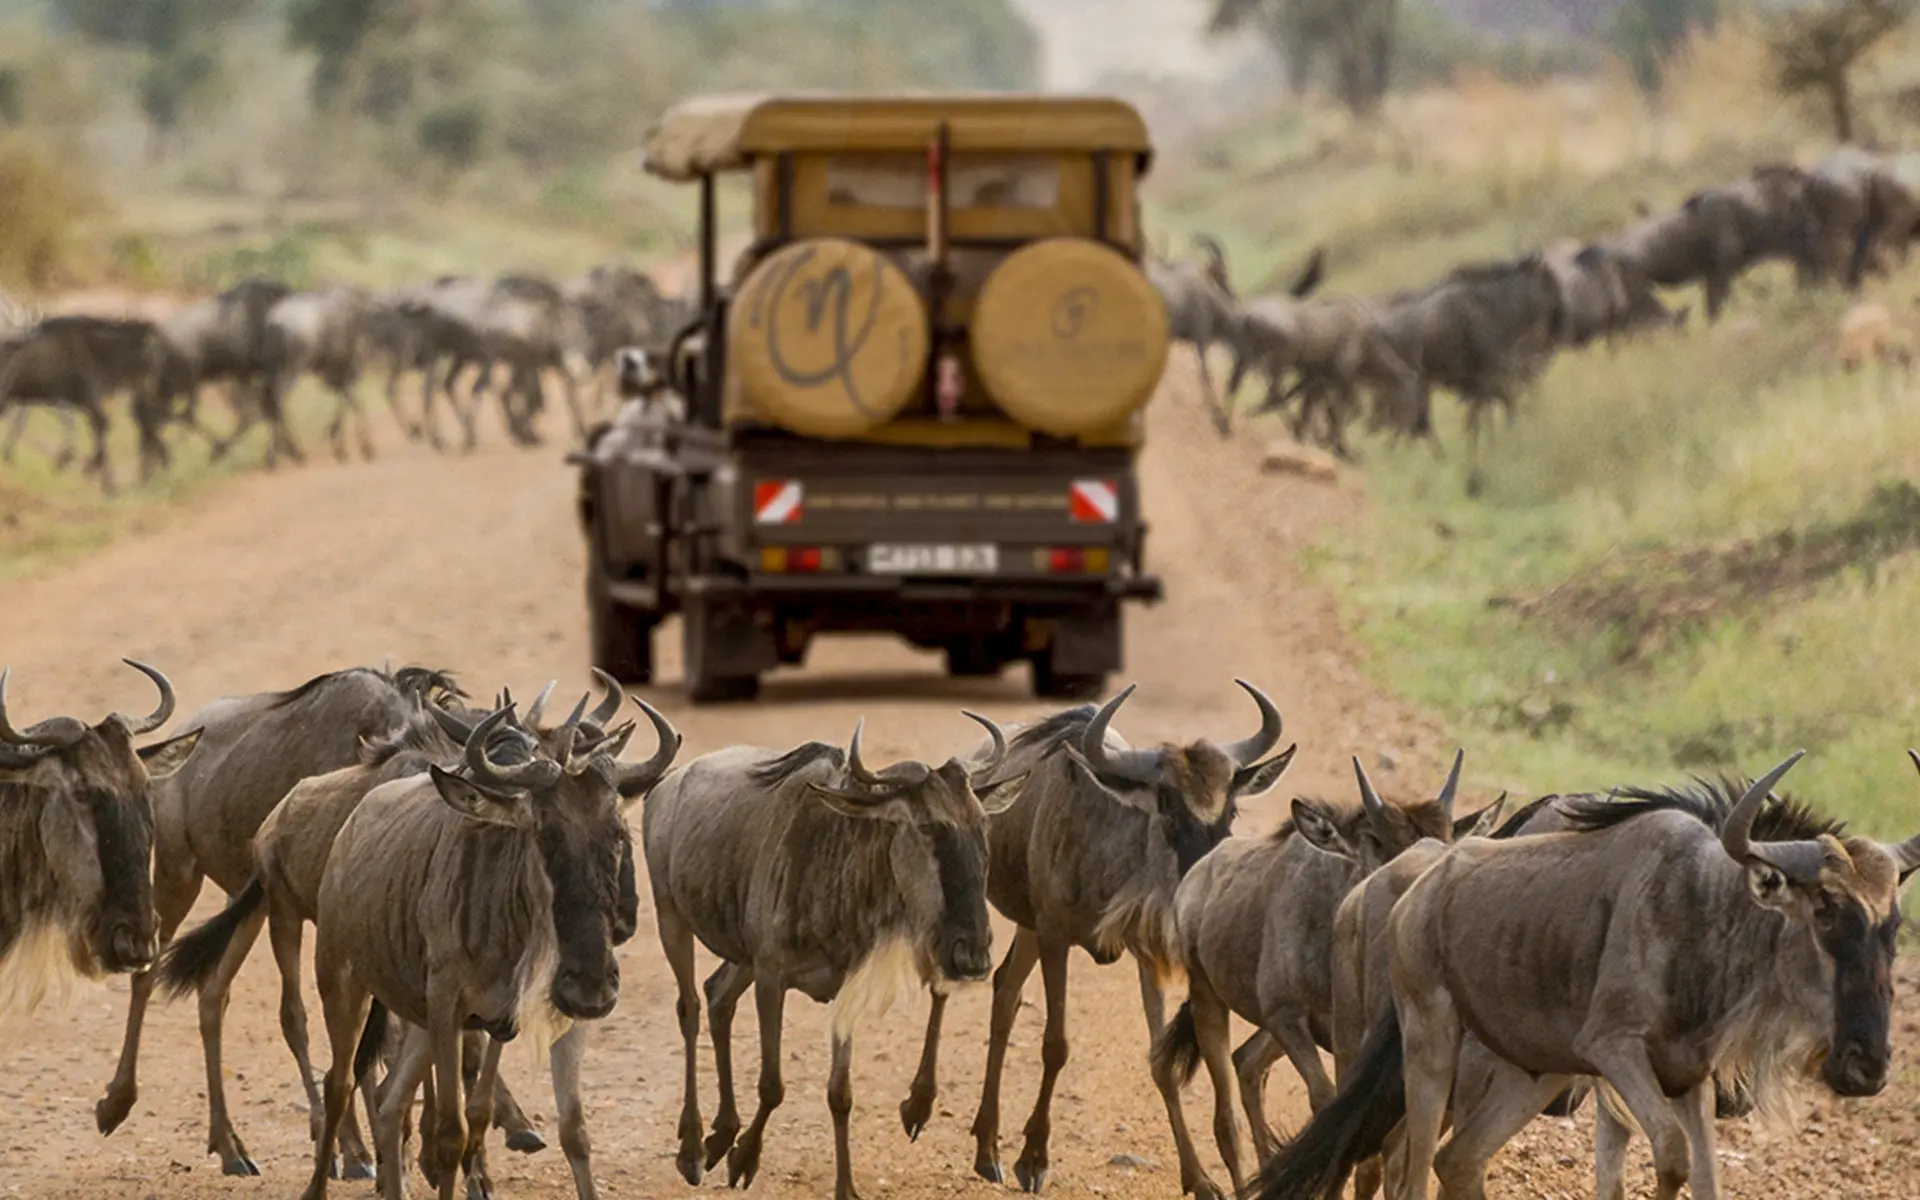 Safari Game Drive Vehicle surrounded by Wildebeests on the great migration